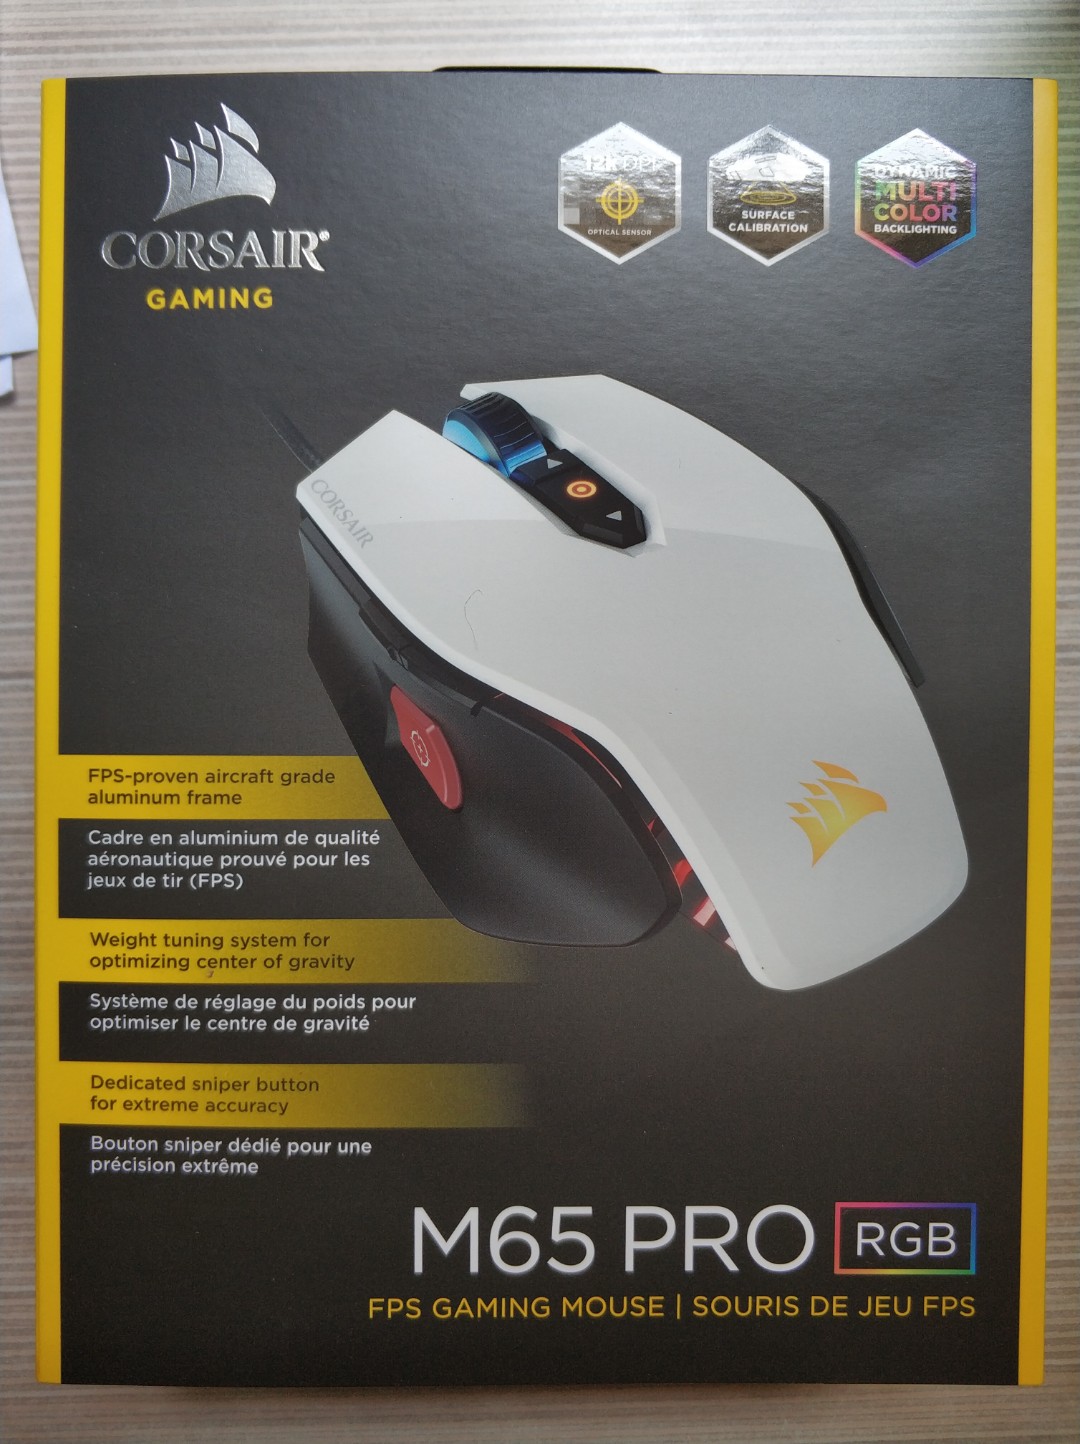 Corsair M65 Pro Rgb Gaming Mouse - selling star necklace roblox only have 60copies toys